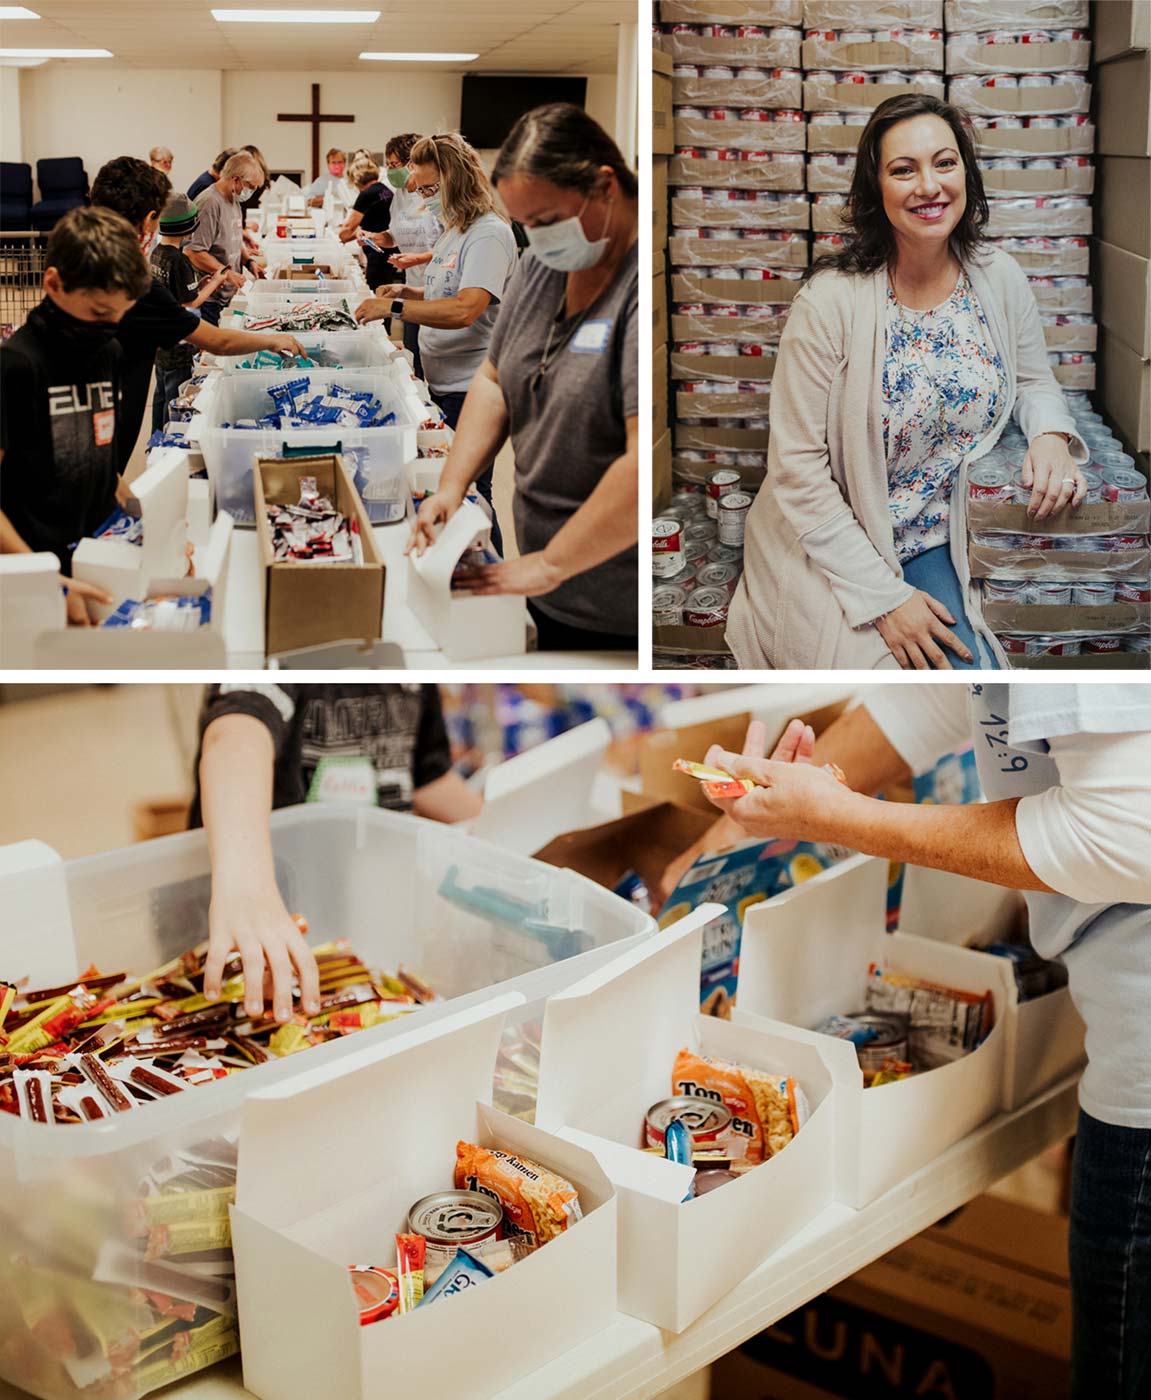 Left top: Volunteers gather weekly to fill food boxes at the West Jefferson United Methodist Church. Right top: Tracy Kronk, founder of Sufficient Grace; Bottom: Boxes contain non-perishable food items for food-insecure students.